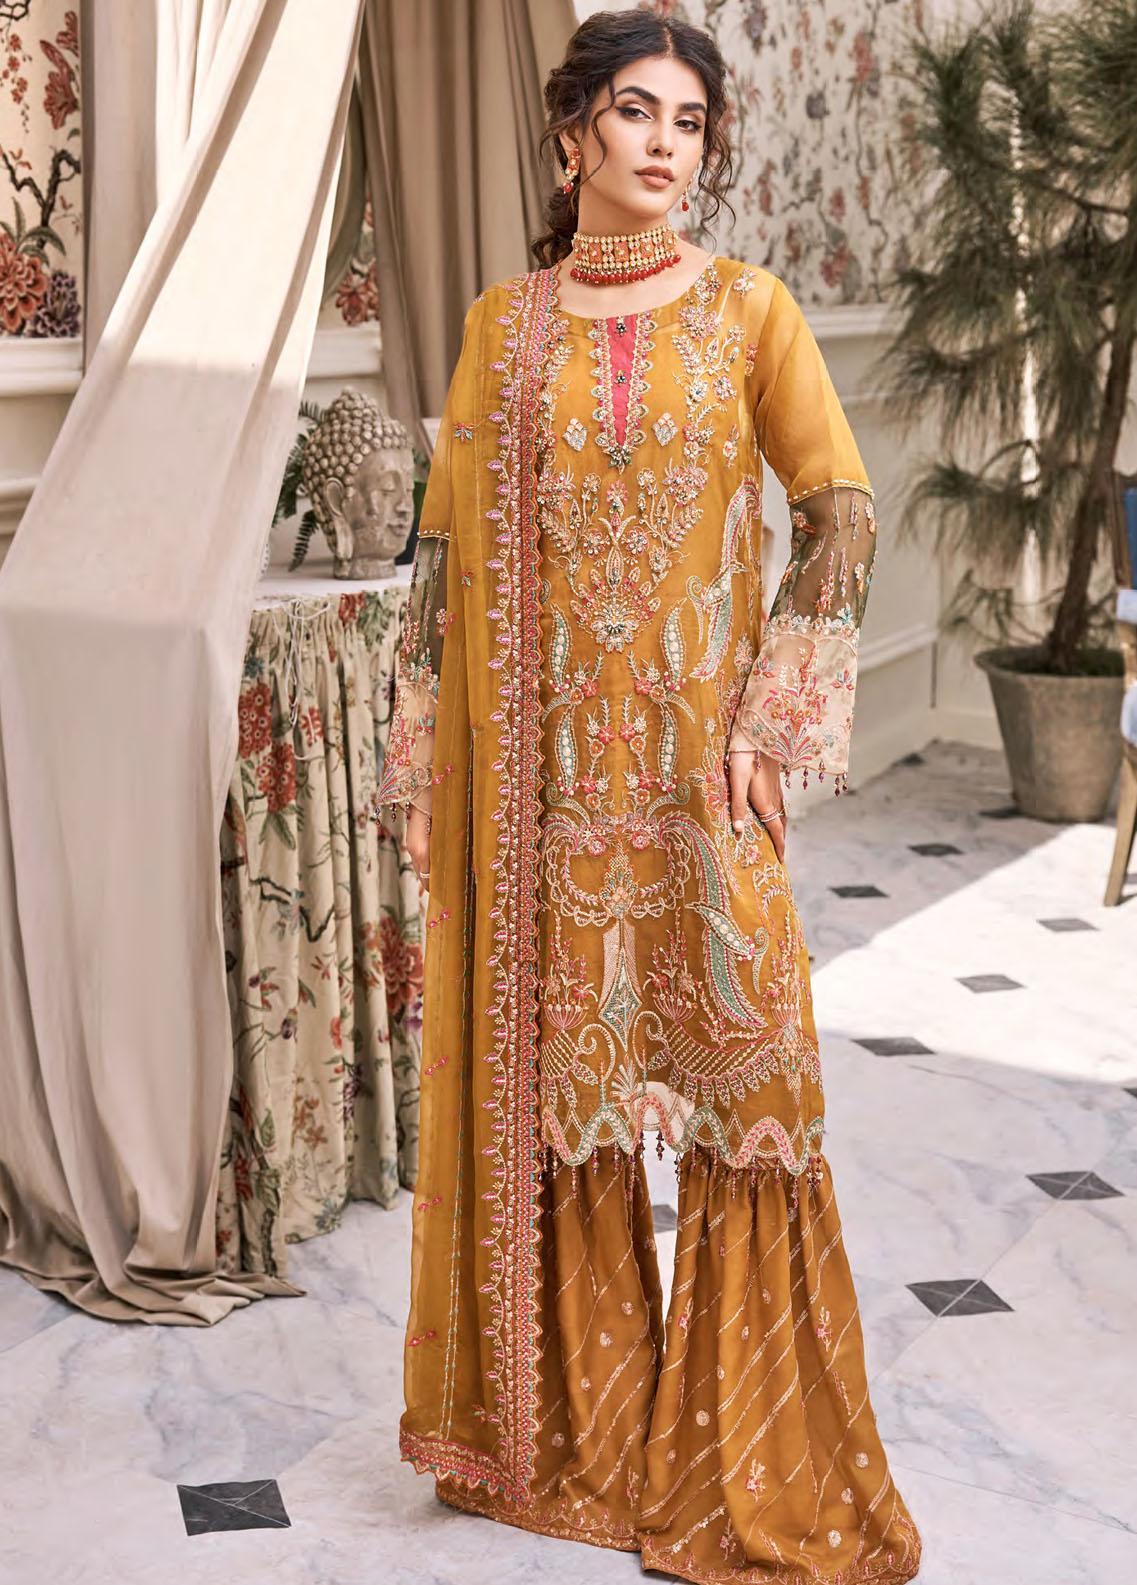 Eshaal By Emaan Adeel Embroidered Suits Unstitched 3 Piece ESH-02